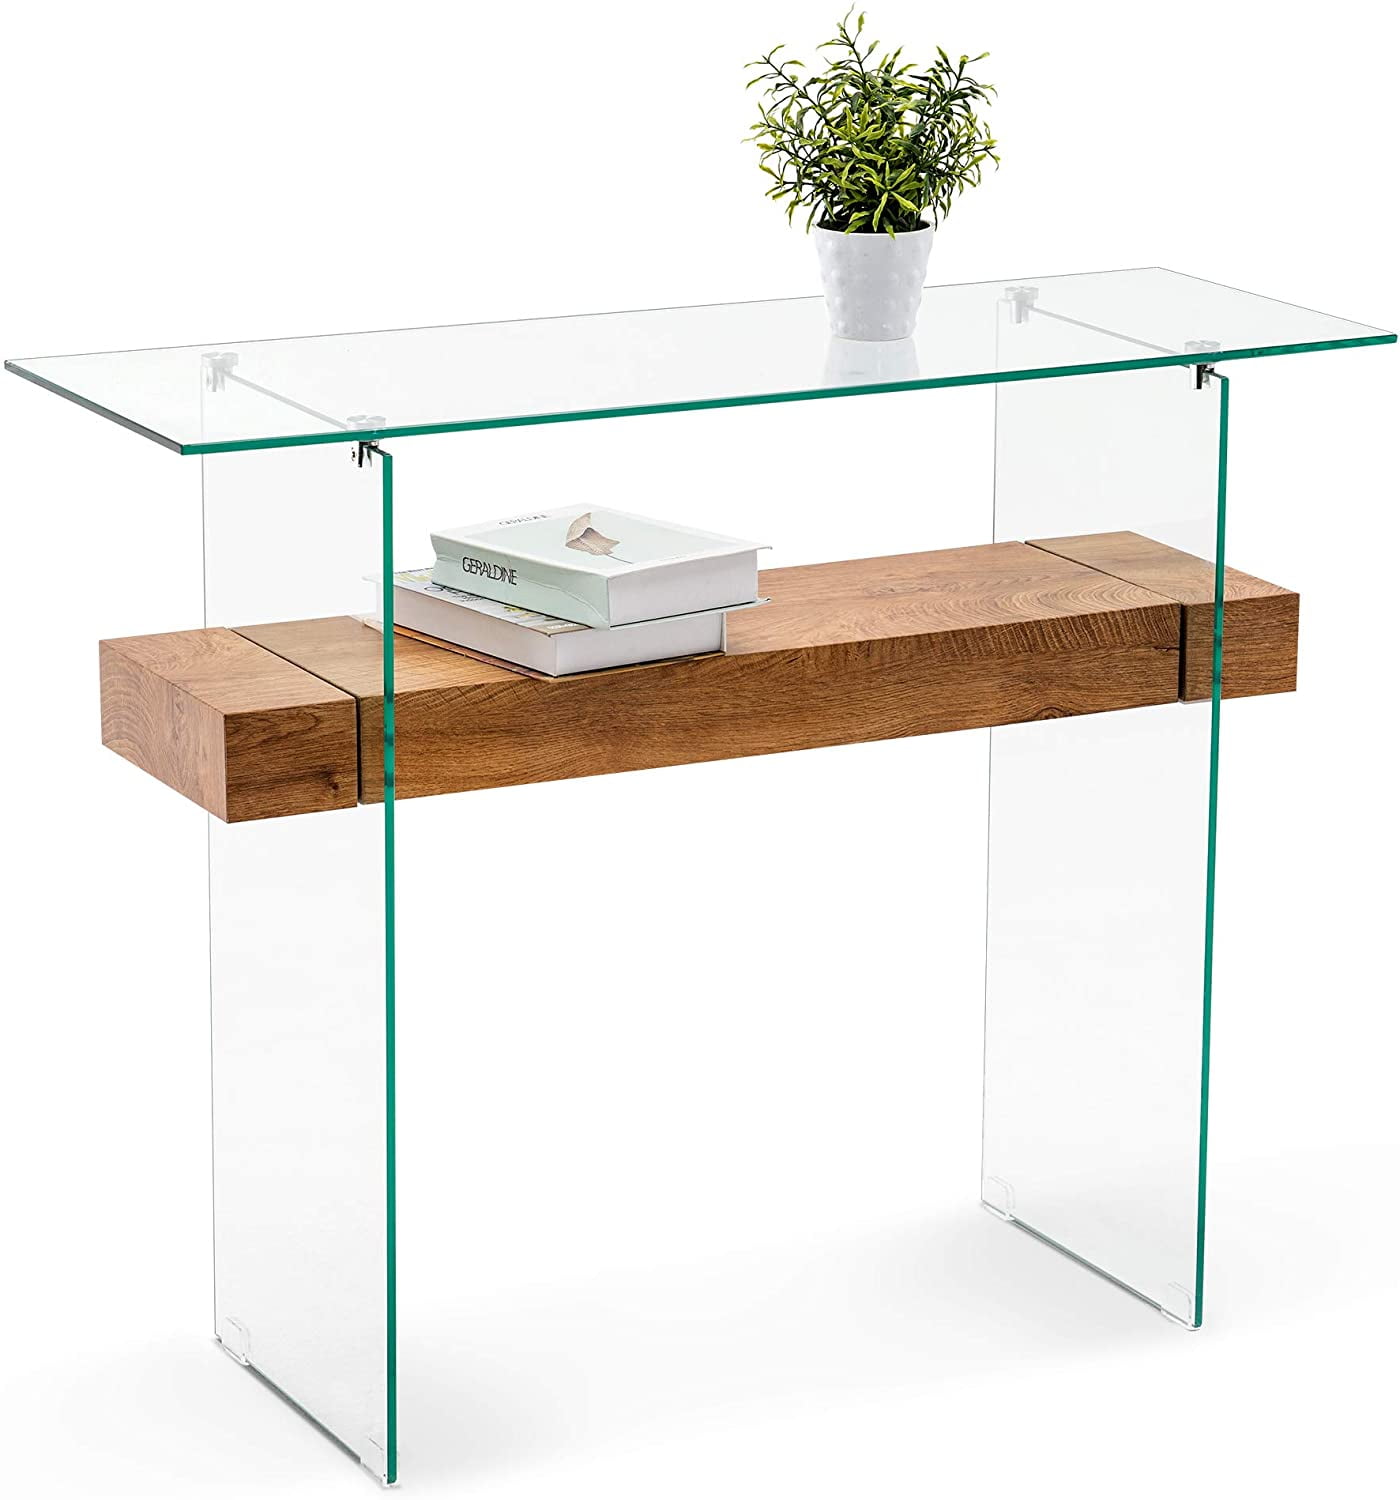 Ivinta Narrow Glass Console Table With Storage Modern Sofa Table Entryway Table Glass Writing